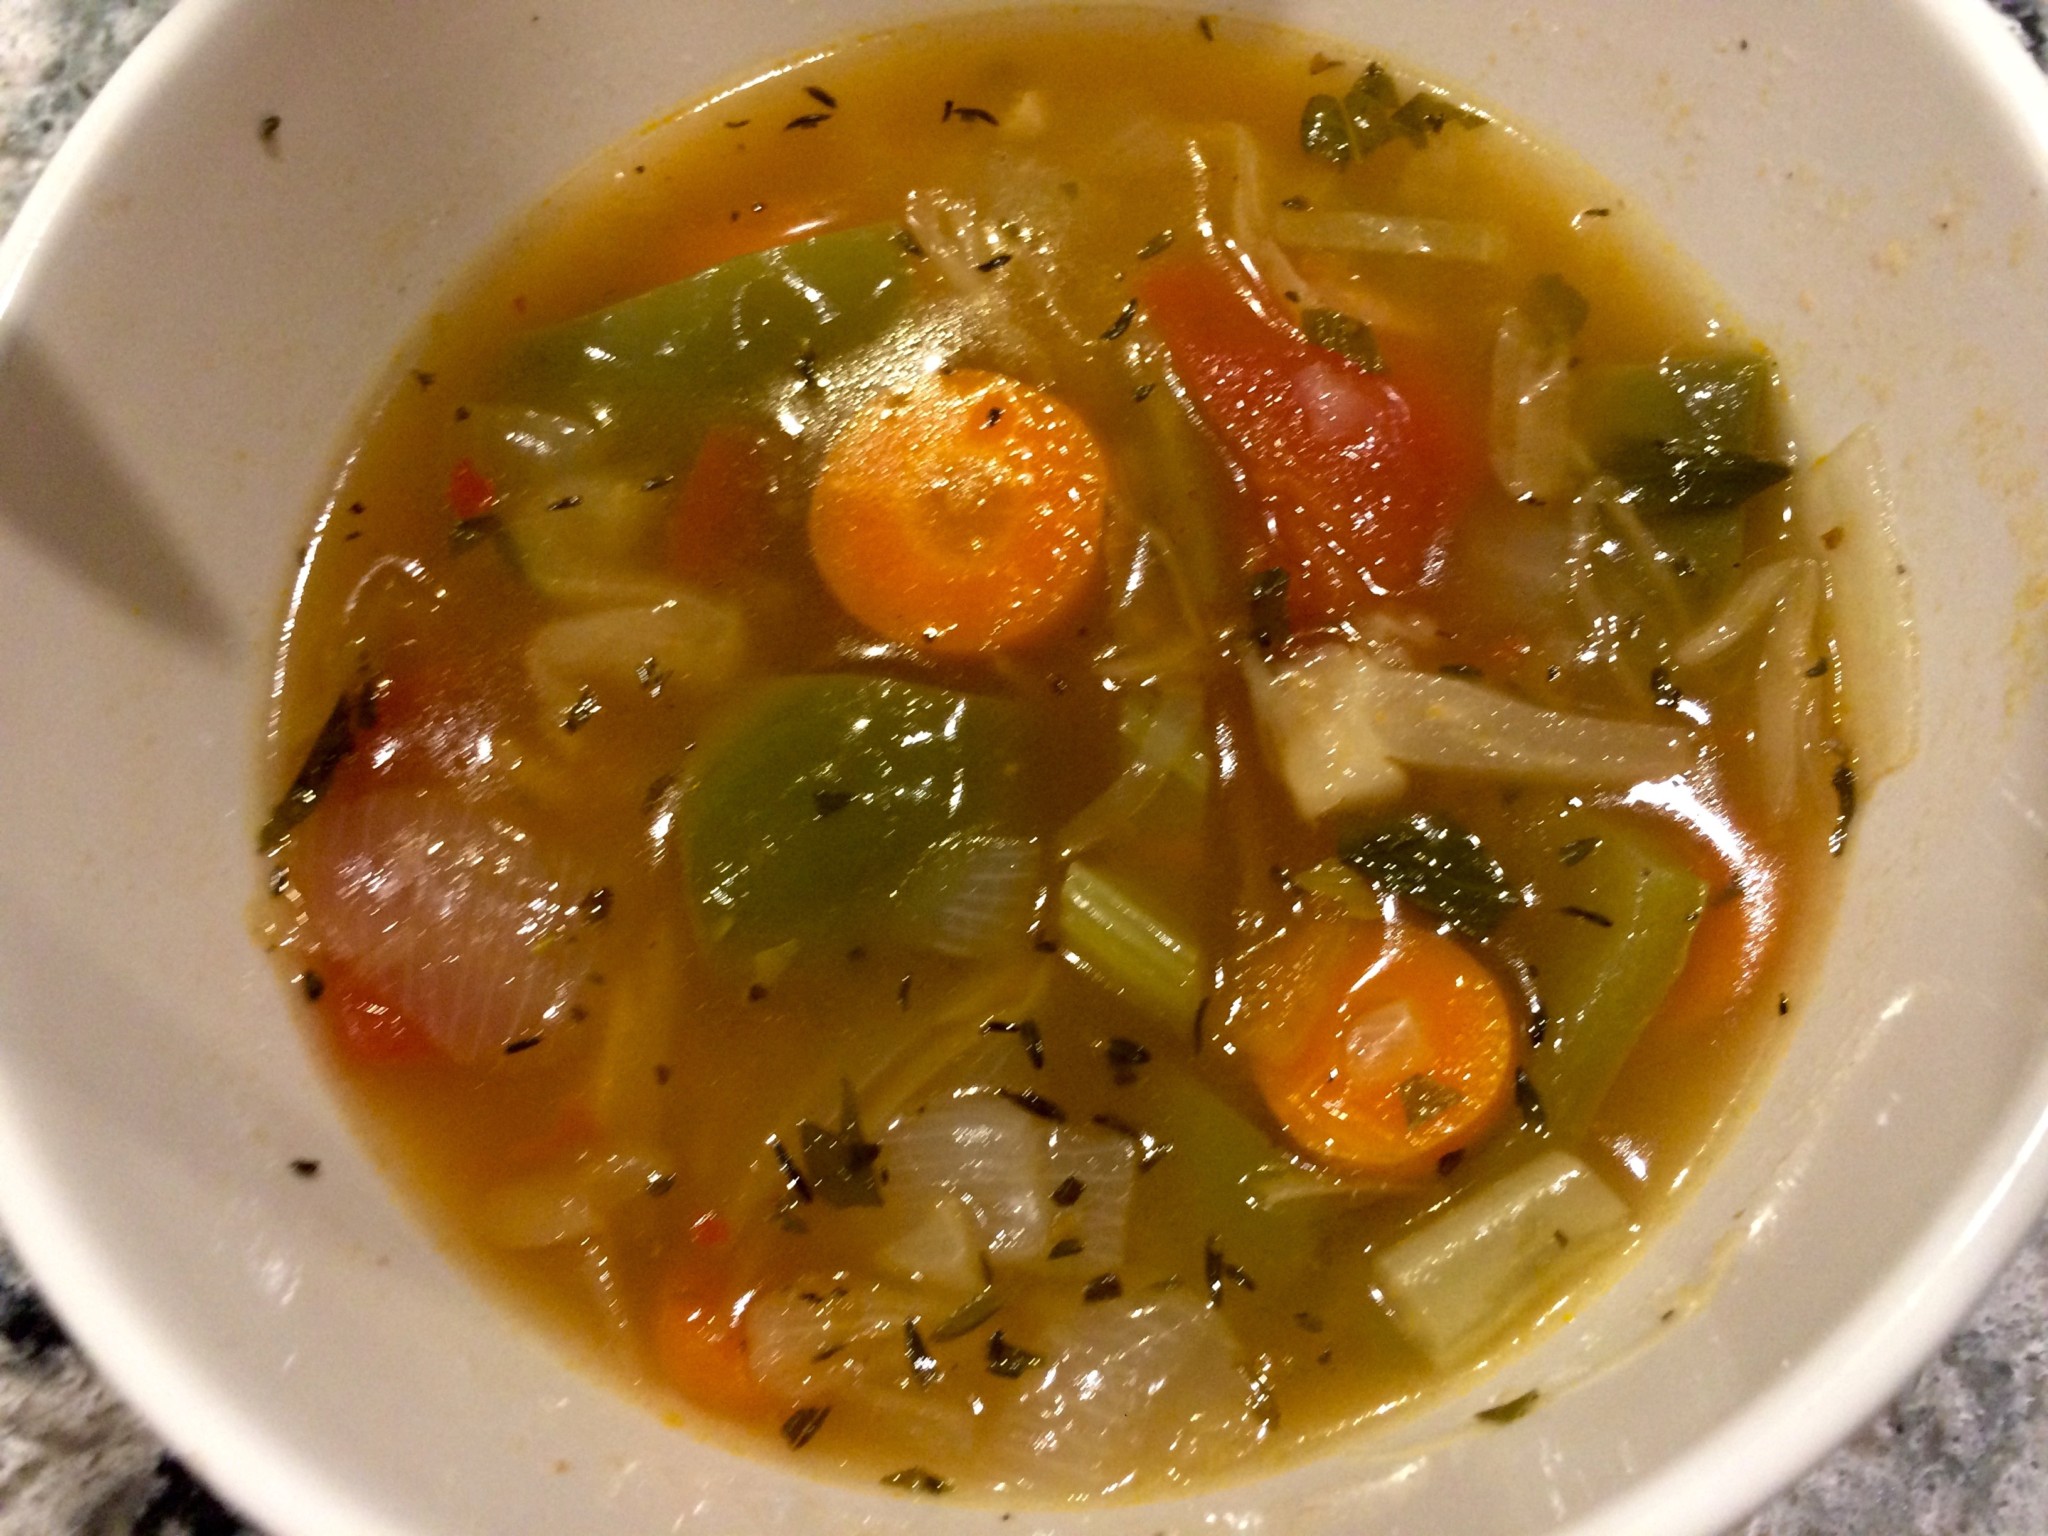 The Pike’s Place Detox Cabbage Soup